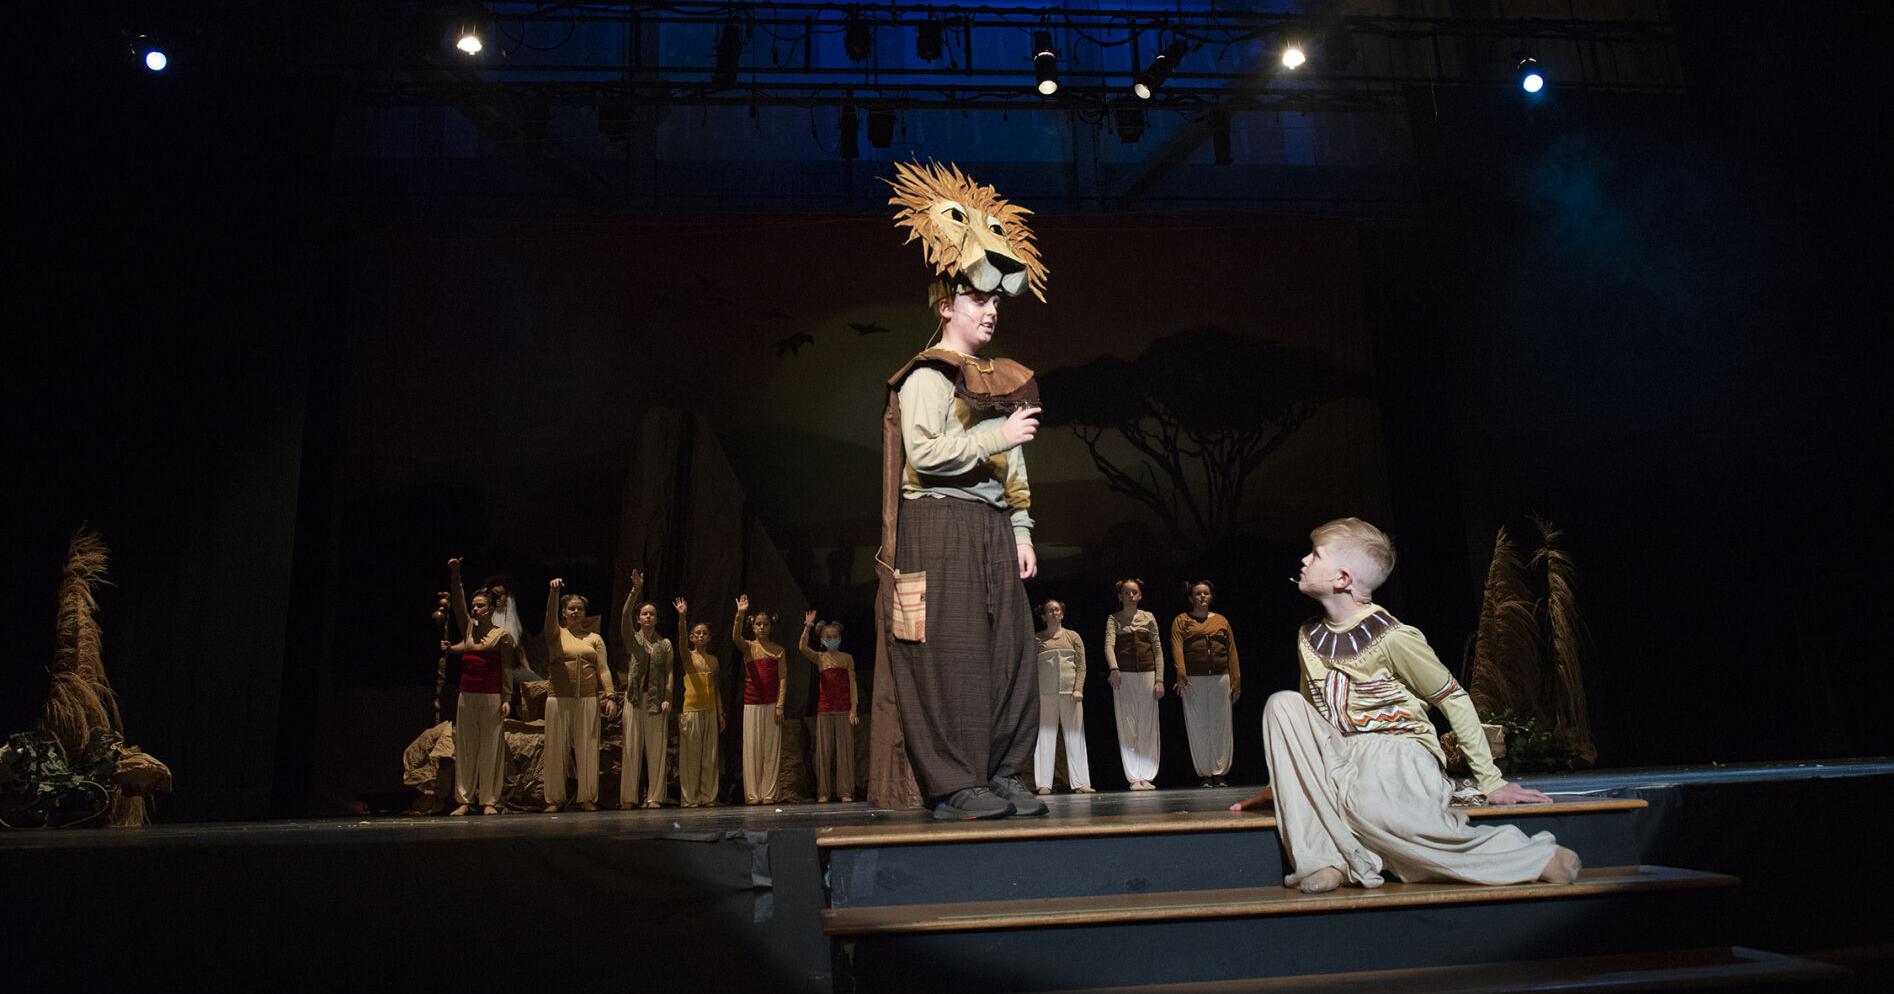 Disney’s The Lion King Jr. opens this weekend  at The Center for Rural Development